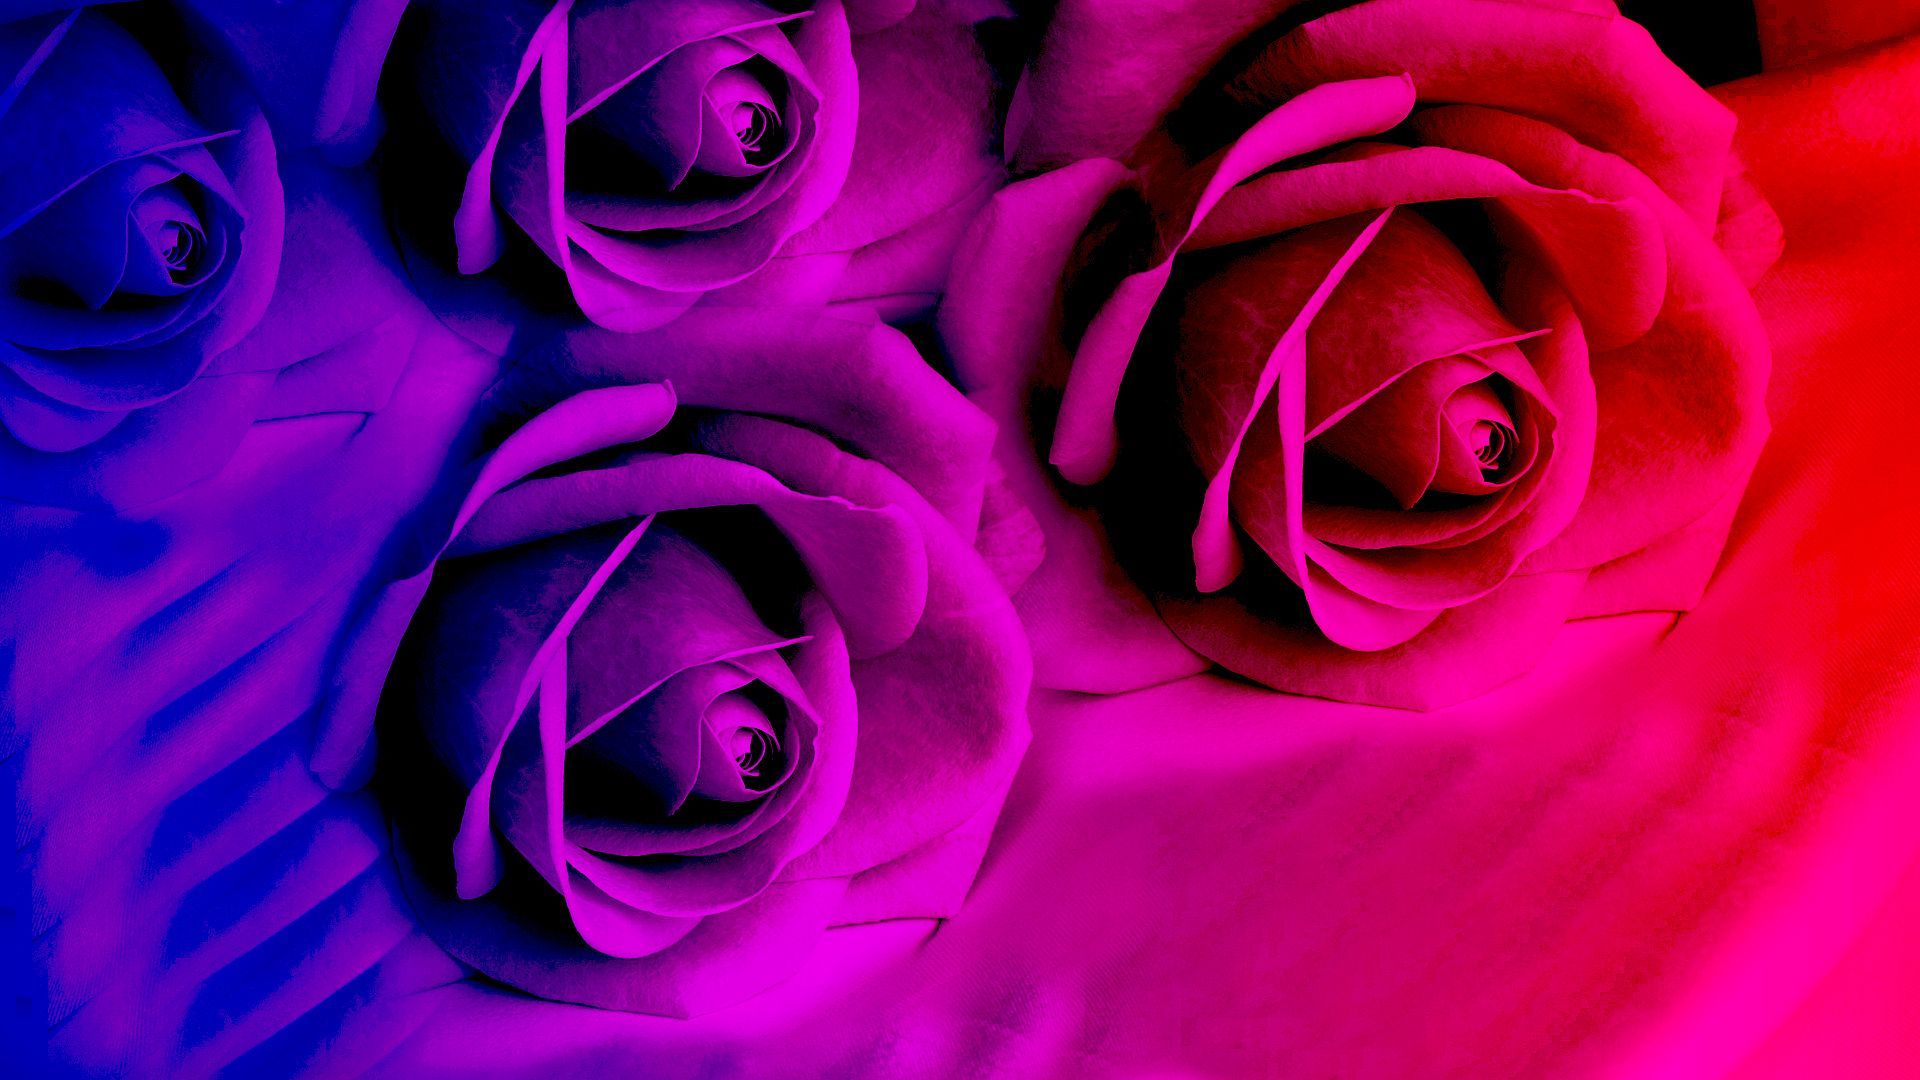 Purple roses in bright color wallpapers and images - wallpapers ...